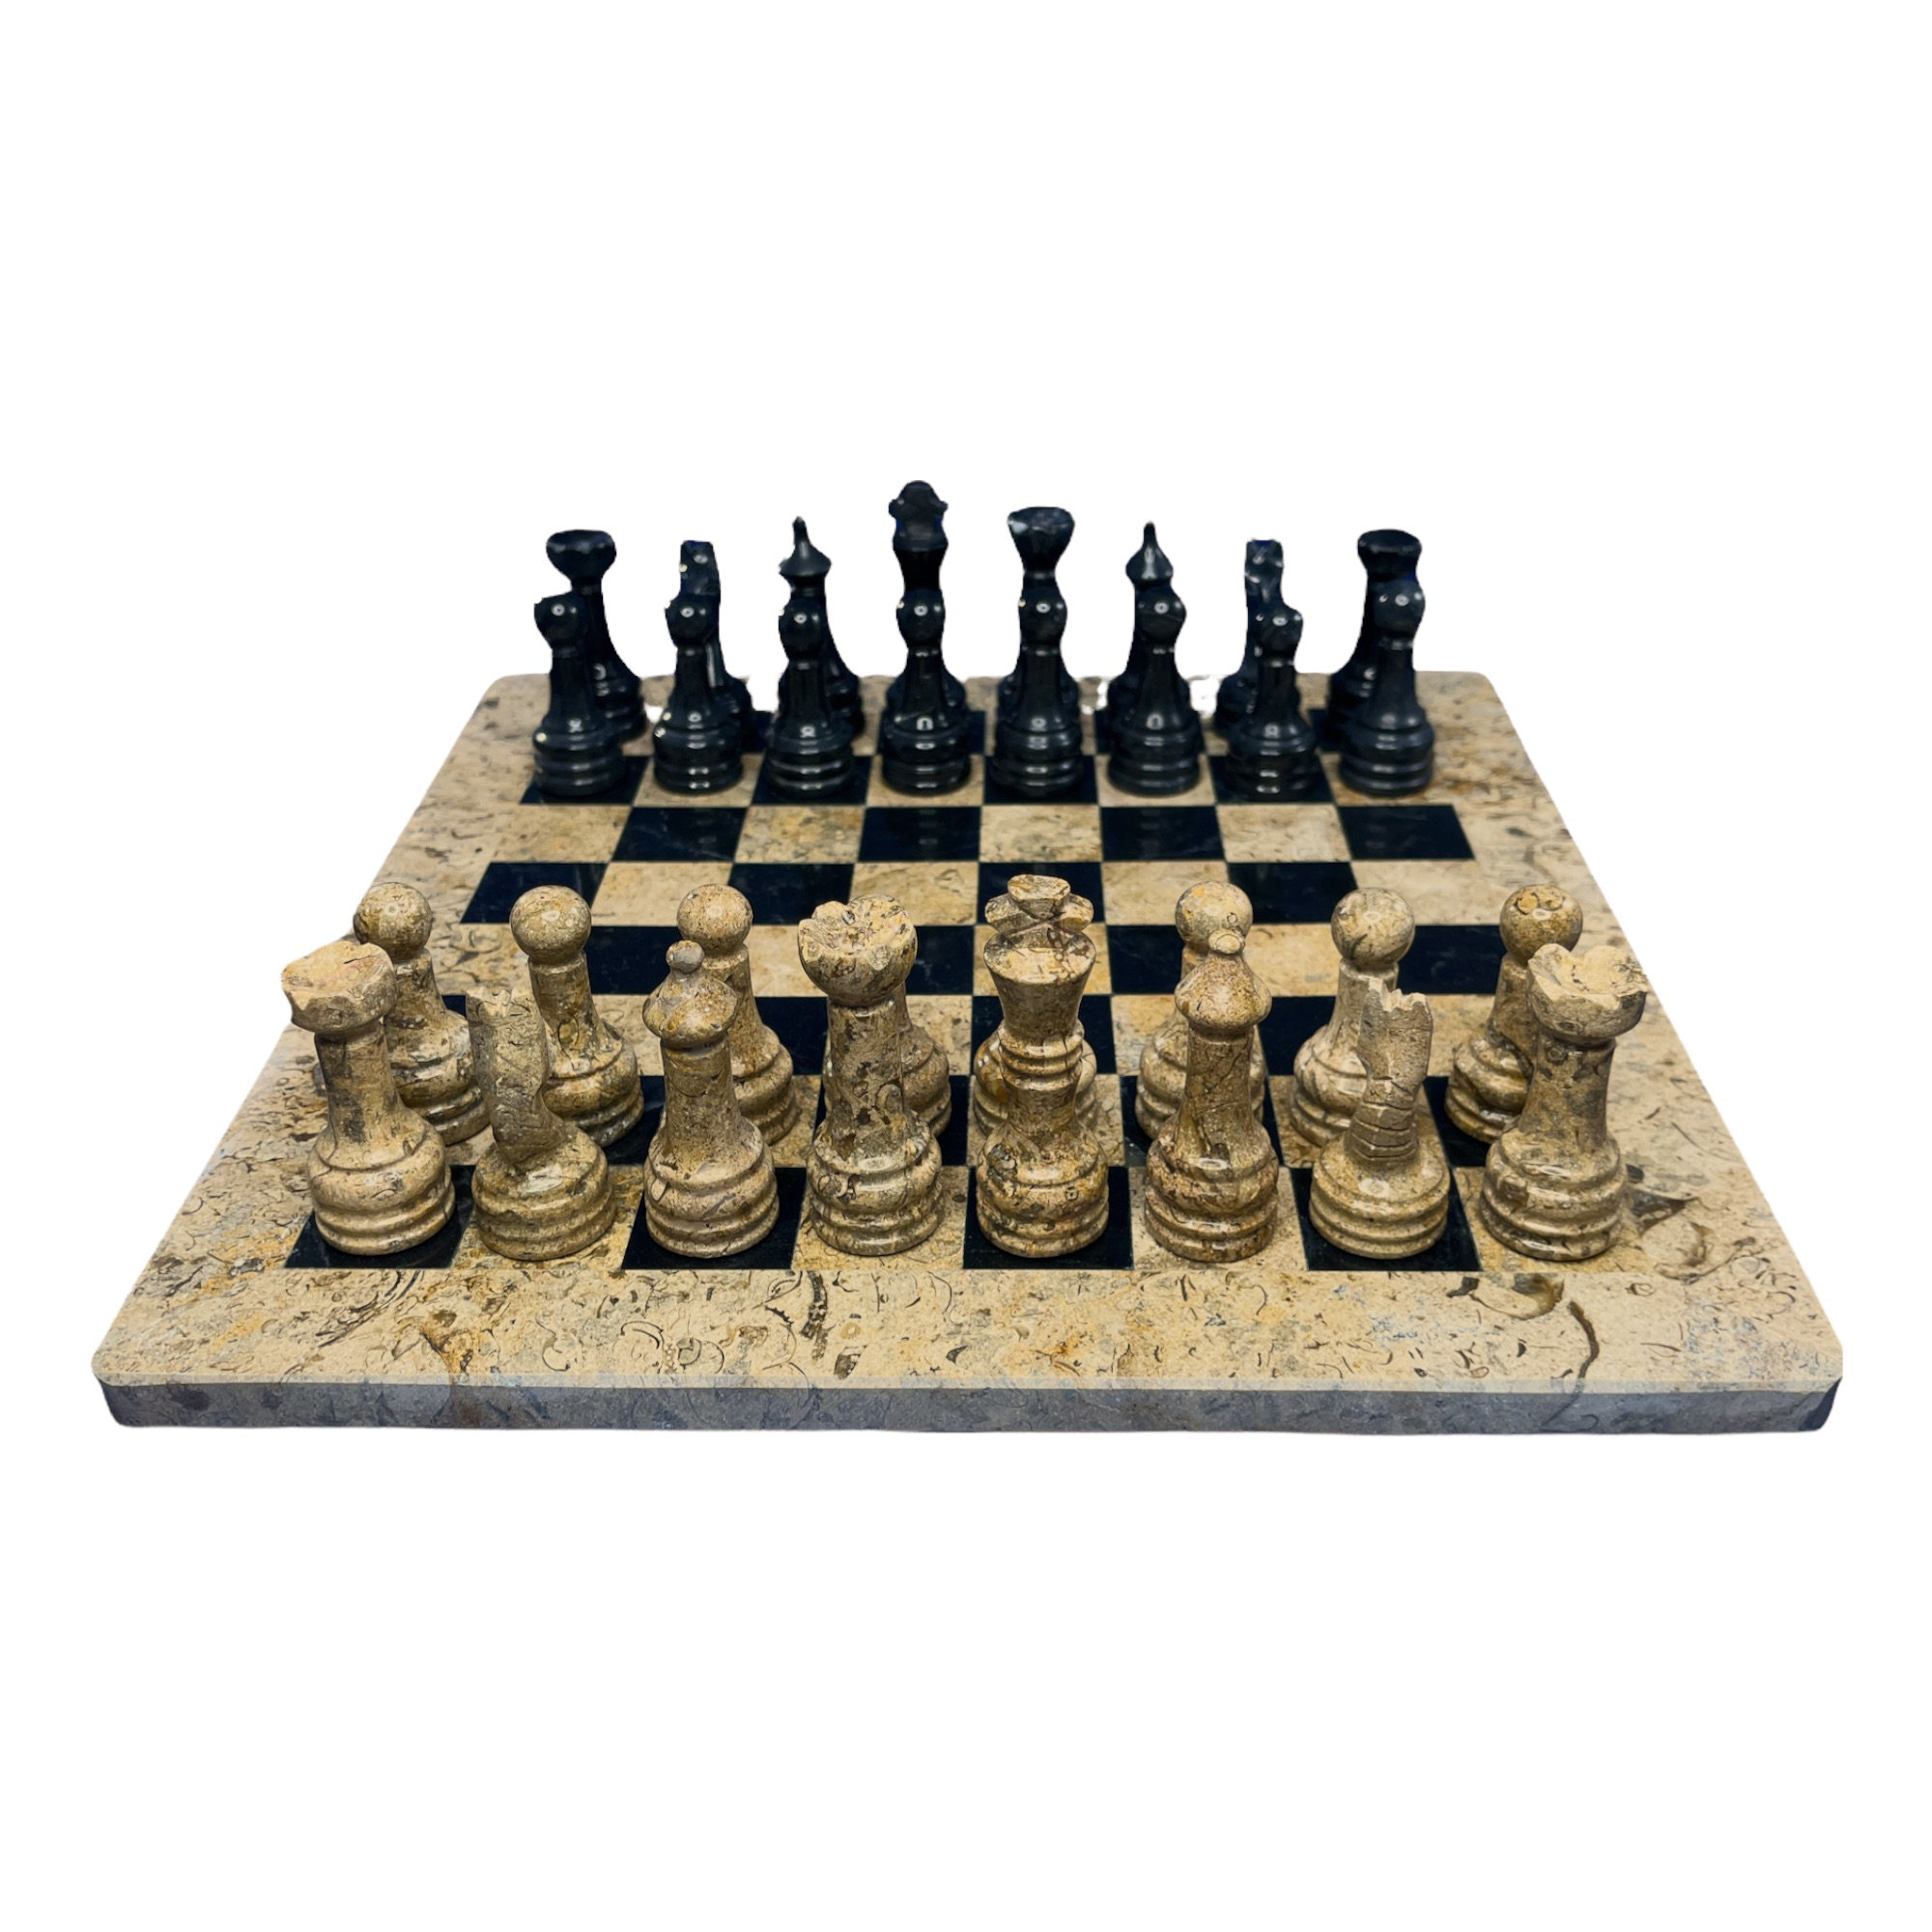 Handmade Leather Chess Board. Metal playing pieces included.